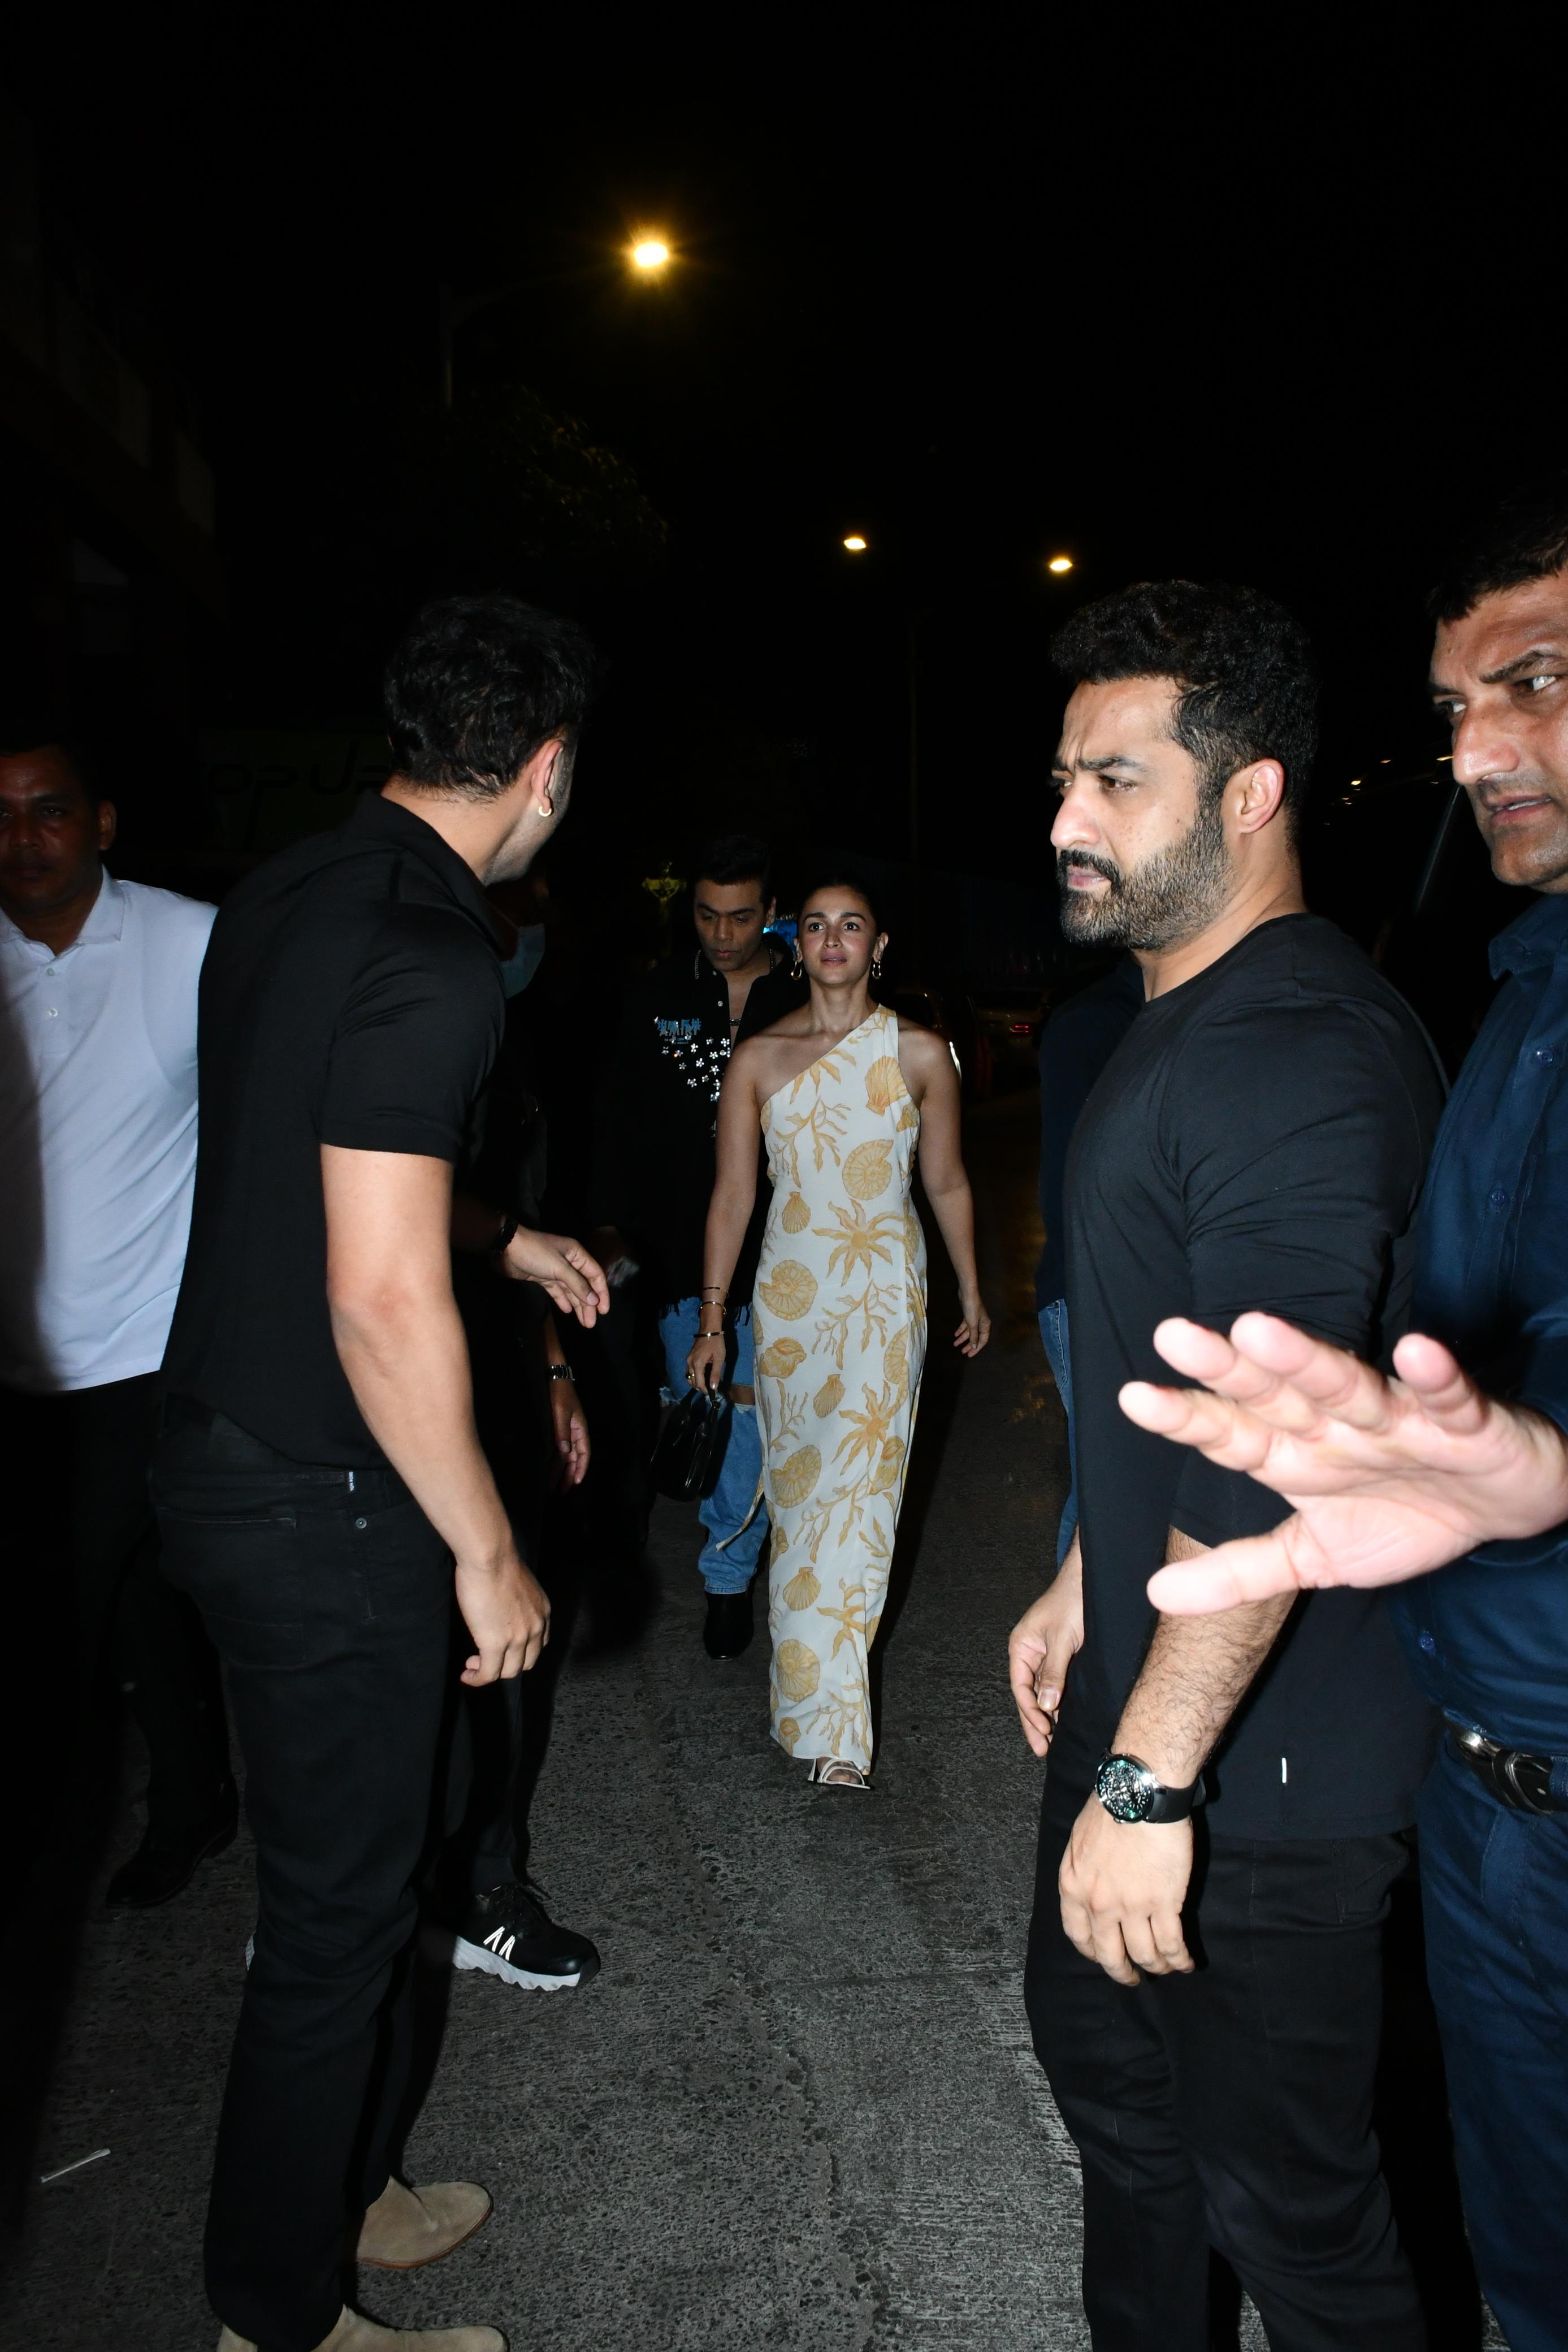 Alia Bhatt also attended the intimate bash. The actress wore a stunning white and yellow printed dress